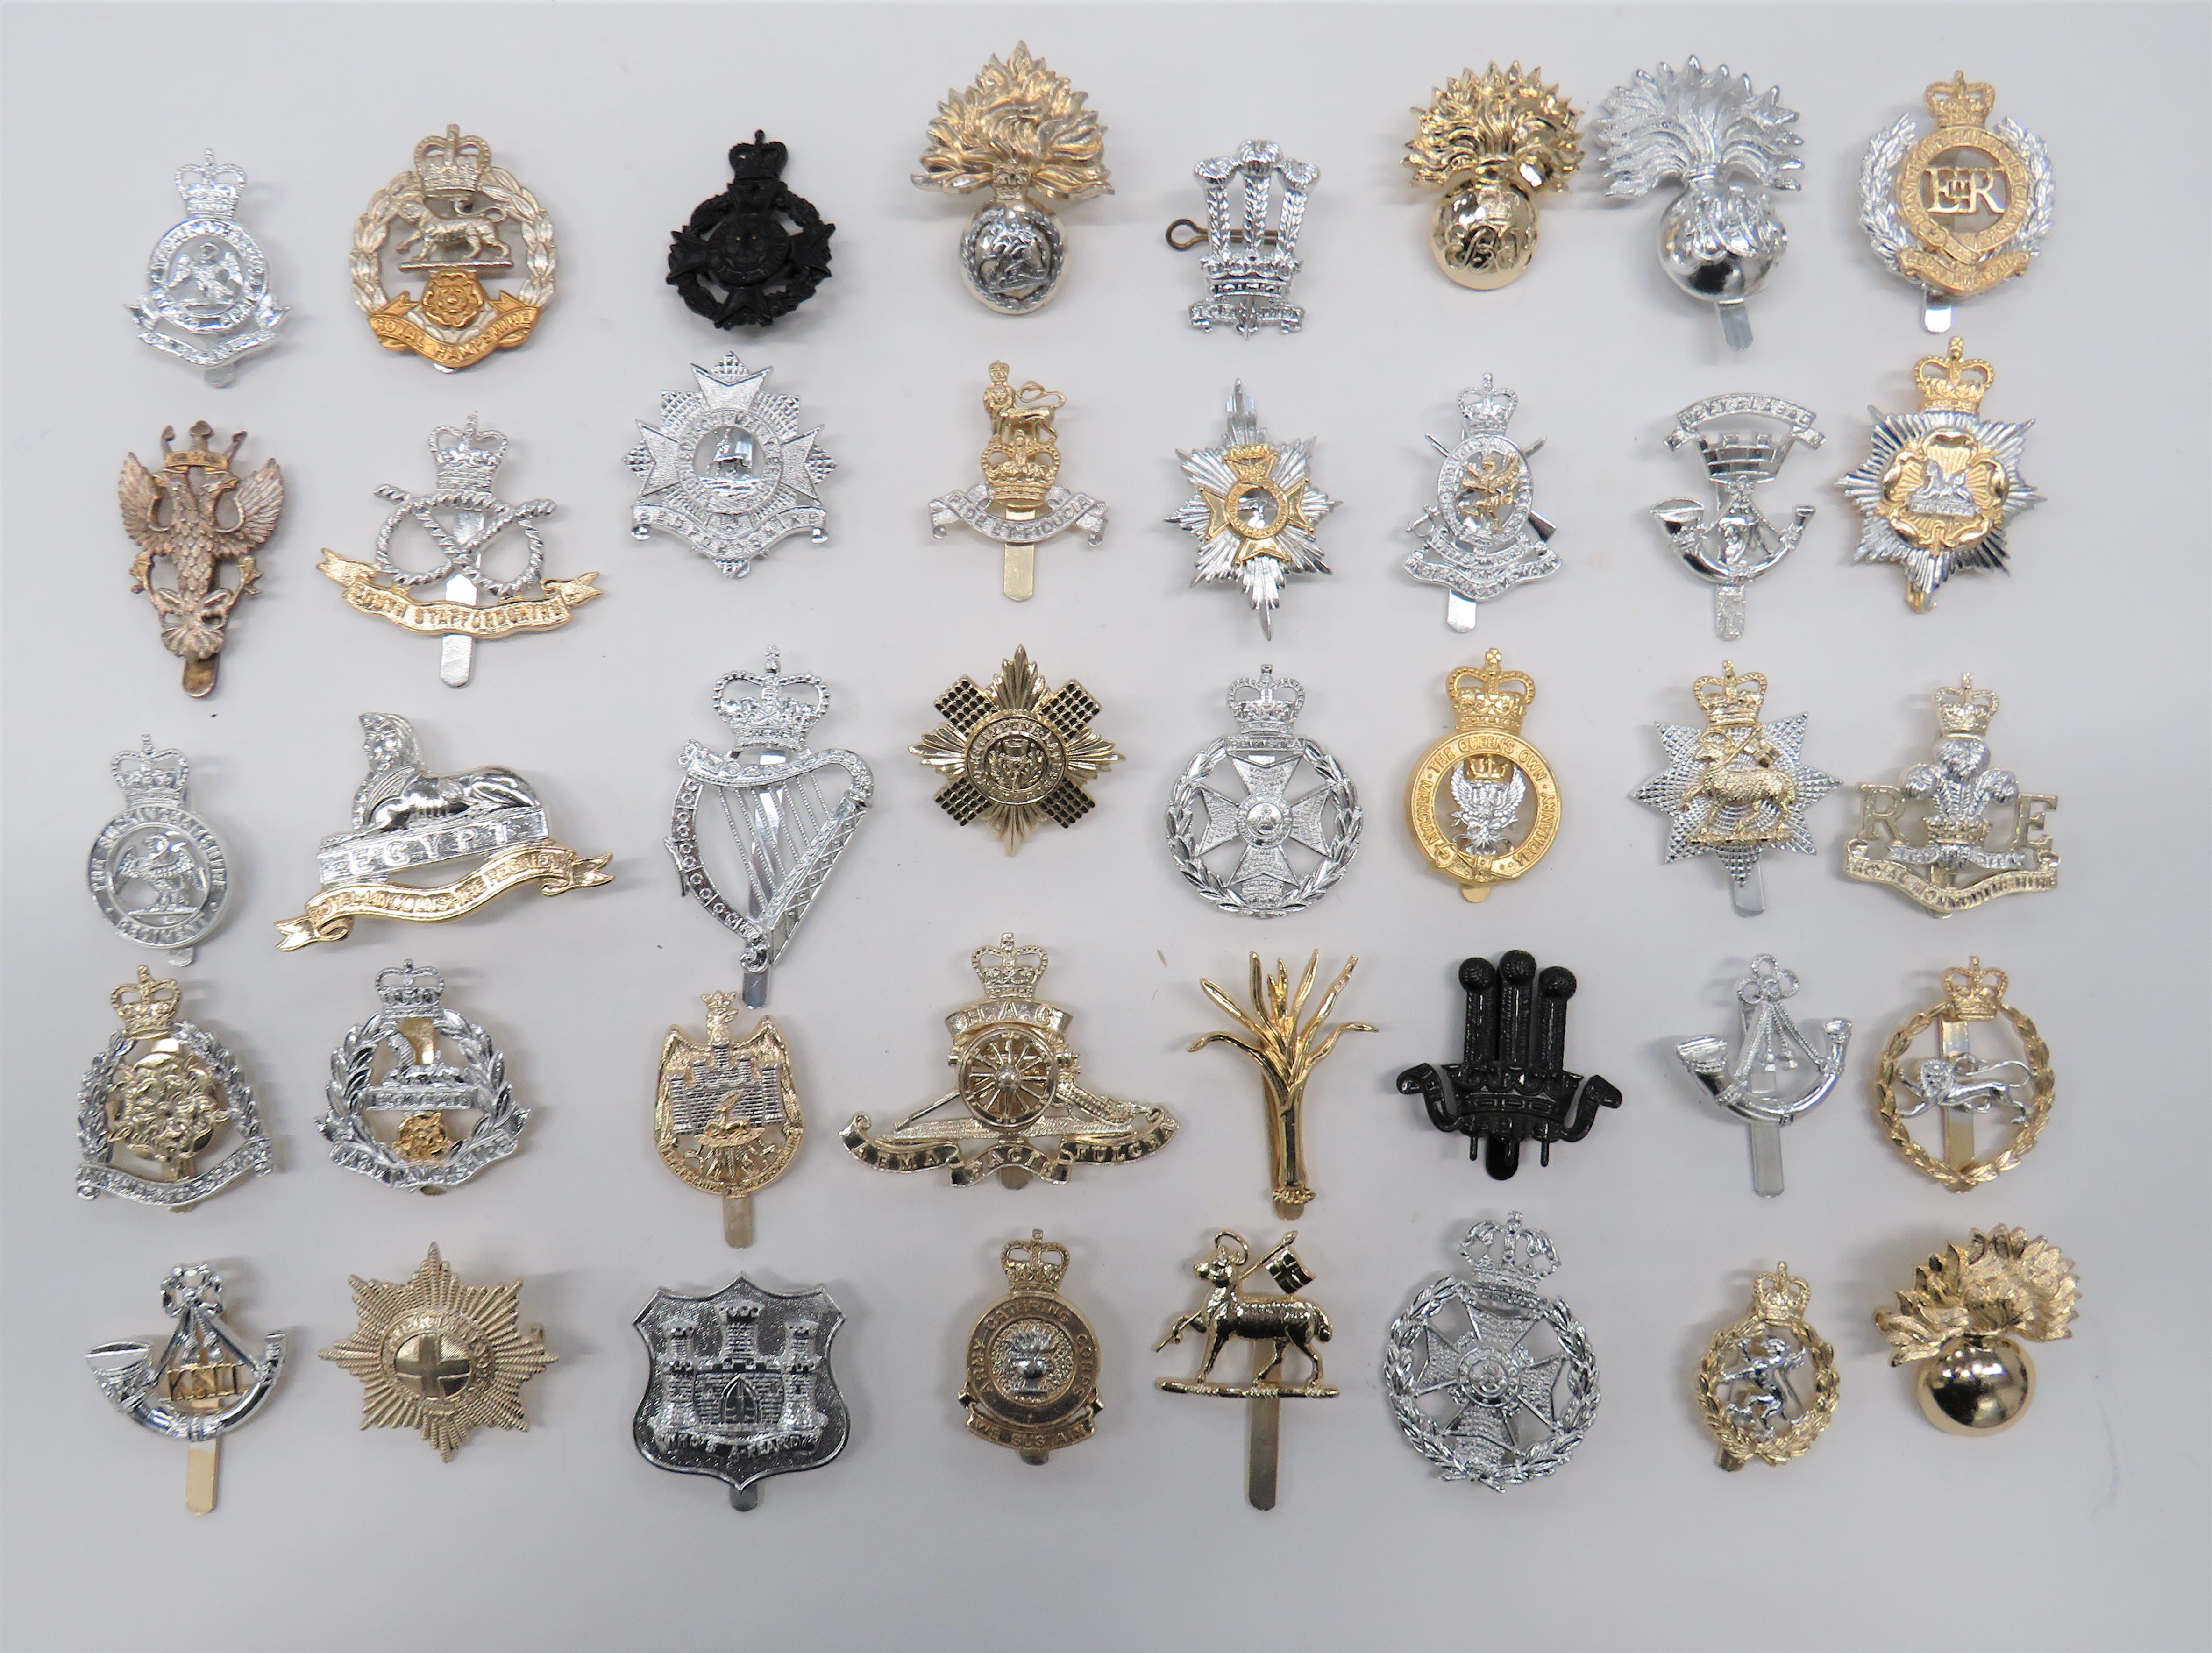 Anodised Infantry, Yeomanry and Corps Cap Badges including QC South Staffordshire ... KSLI ... QC